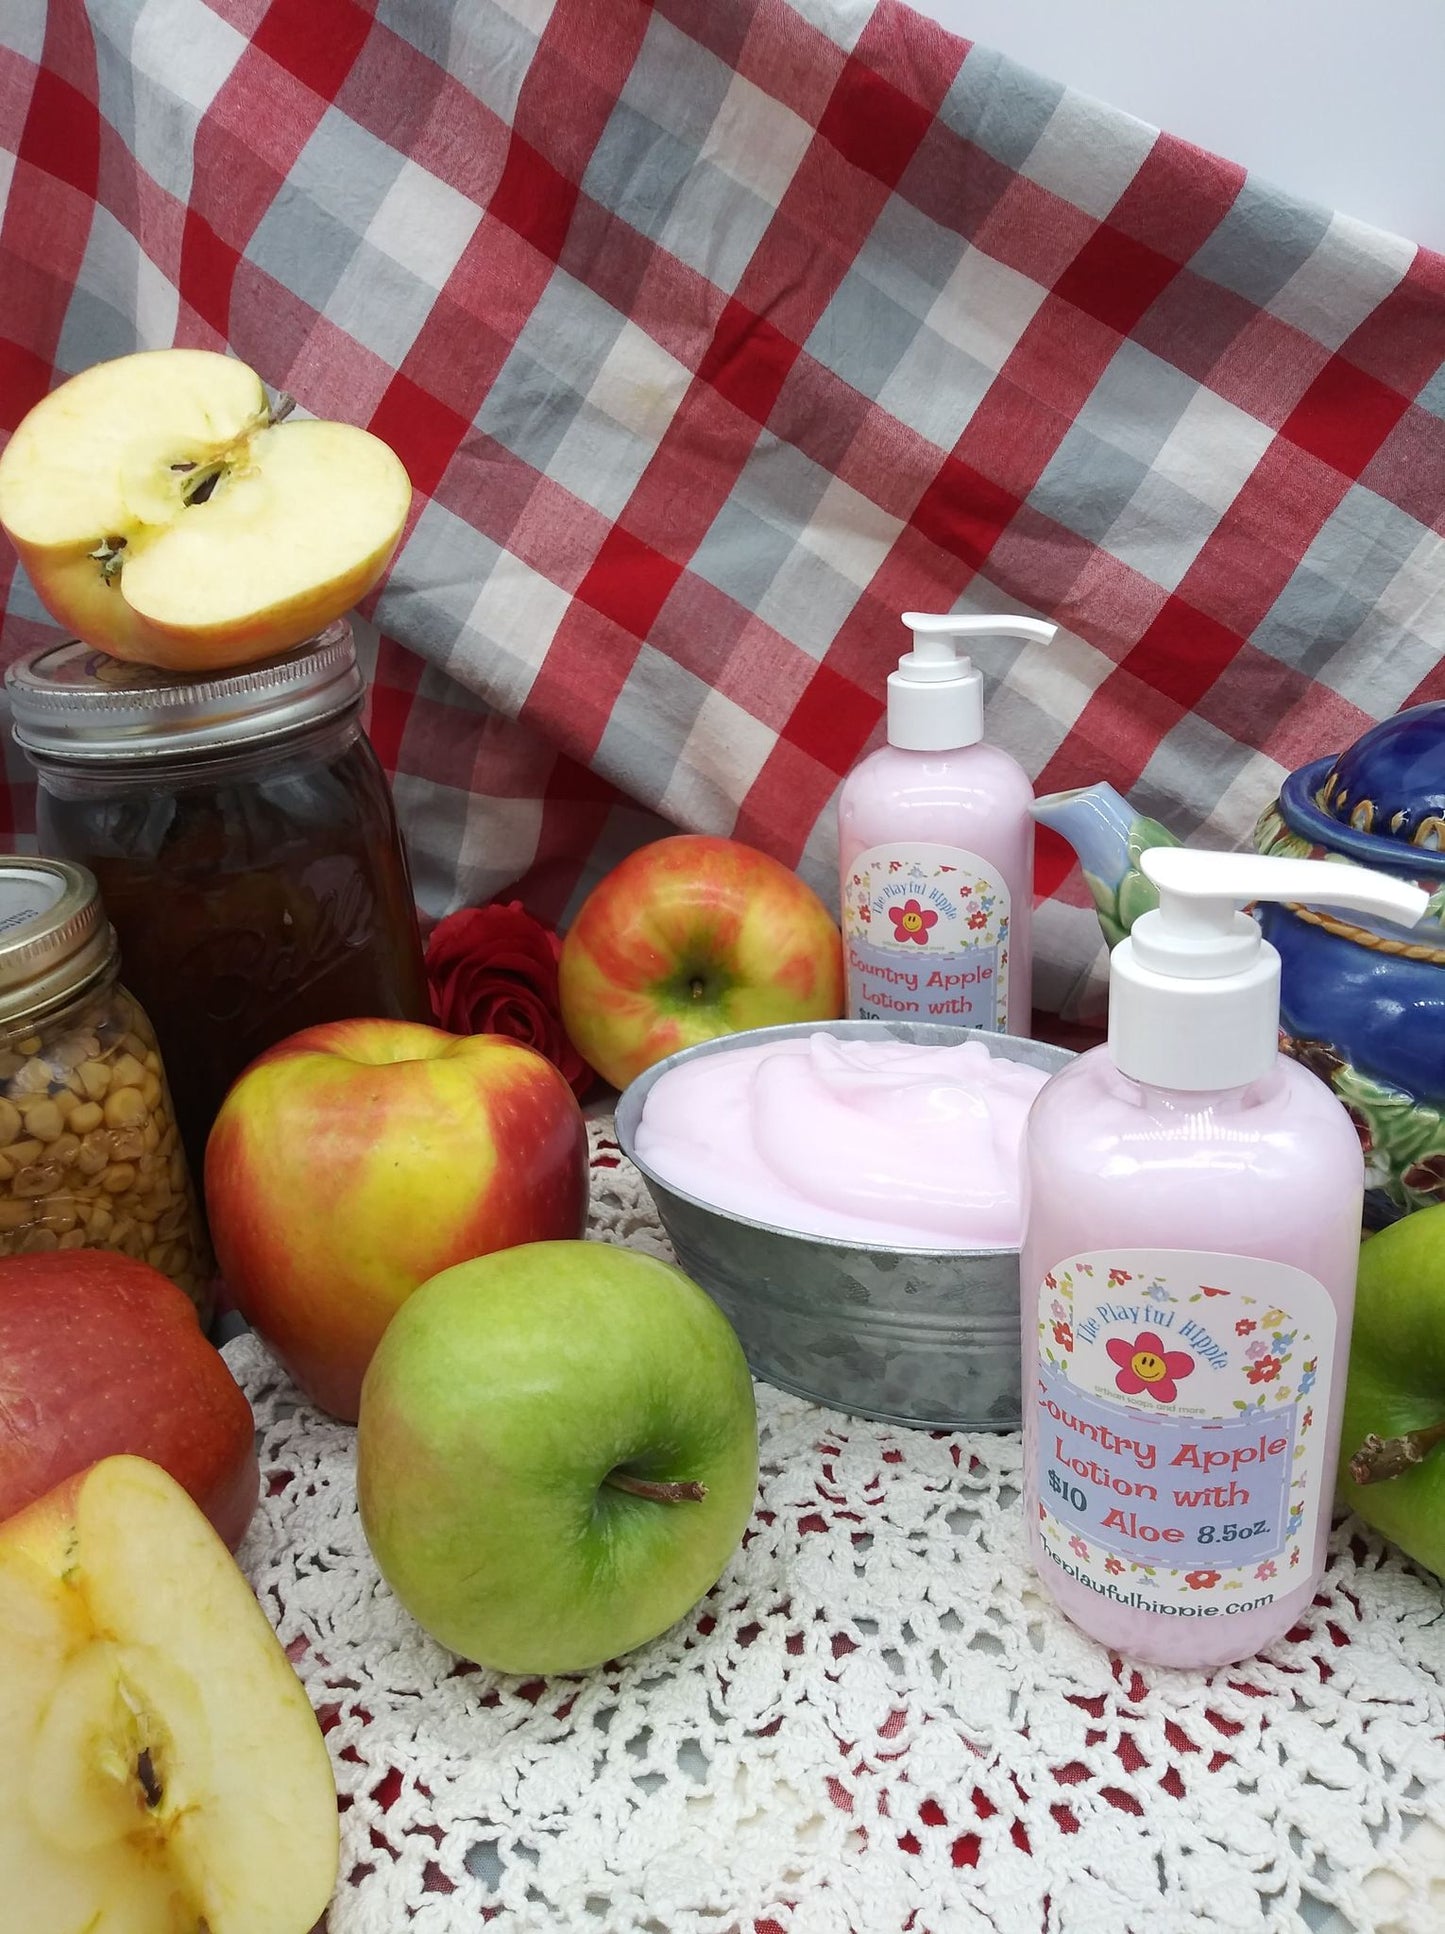 Country Apples Lotion with Aloe